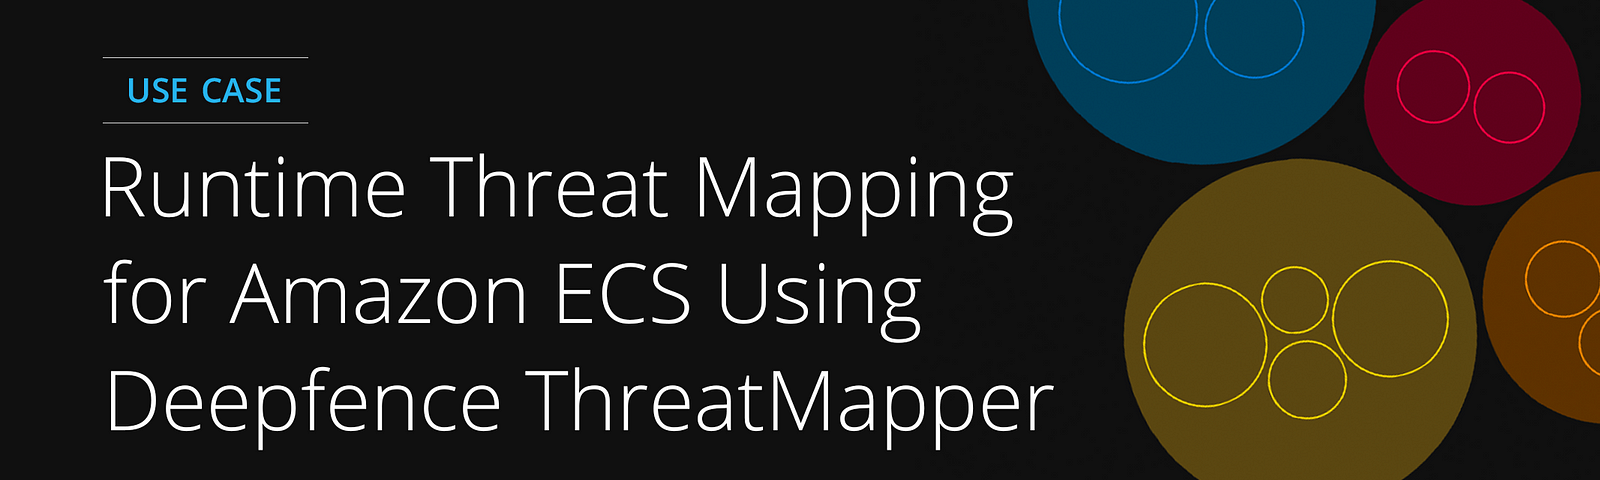 Image for blog post: Runtime Threat Mapping for Amazon ECS Using Deepfence ThreatMapper